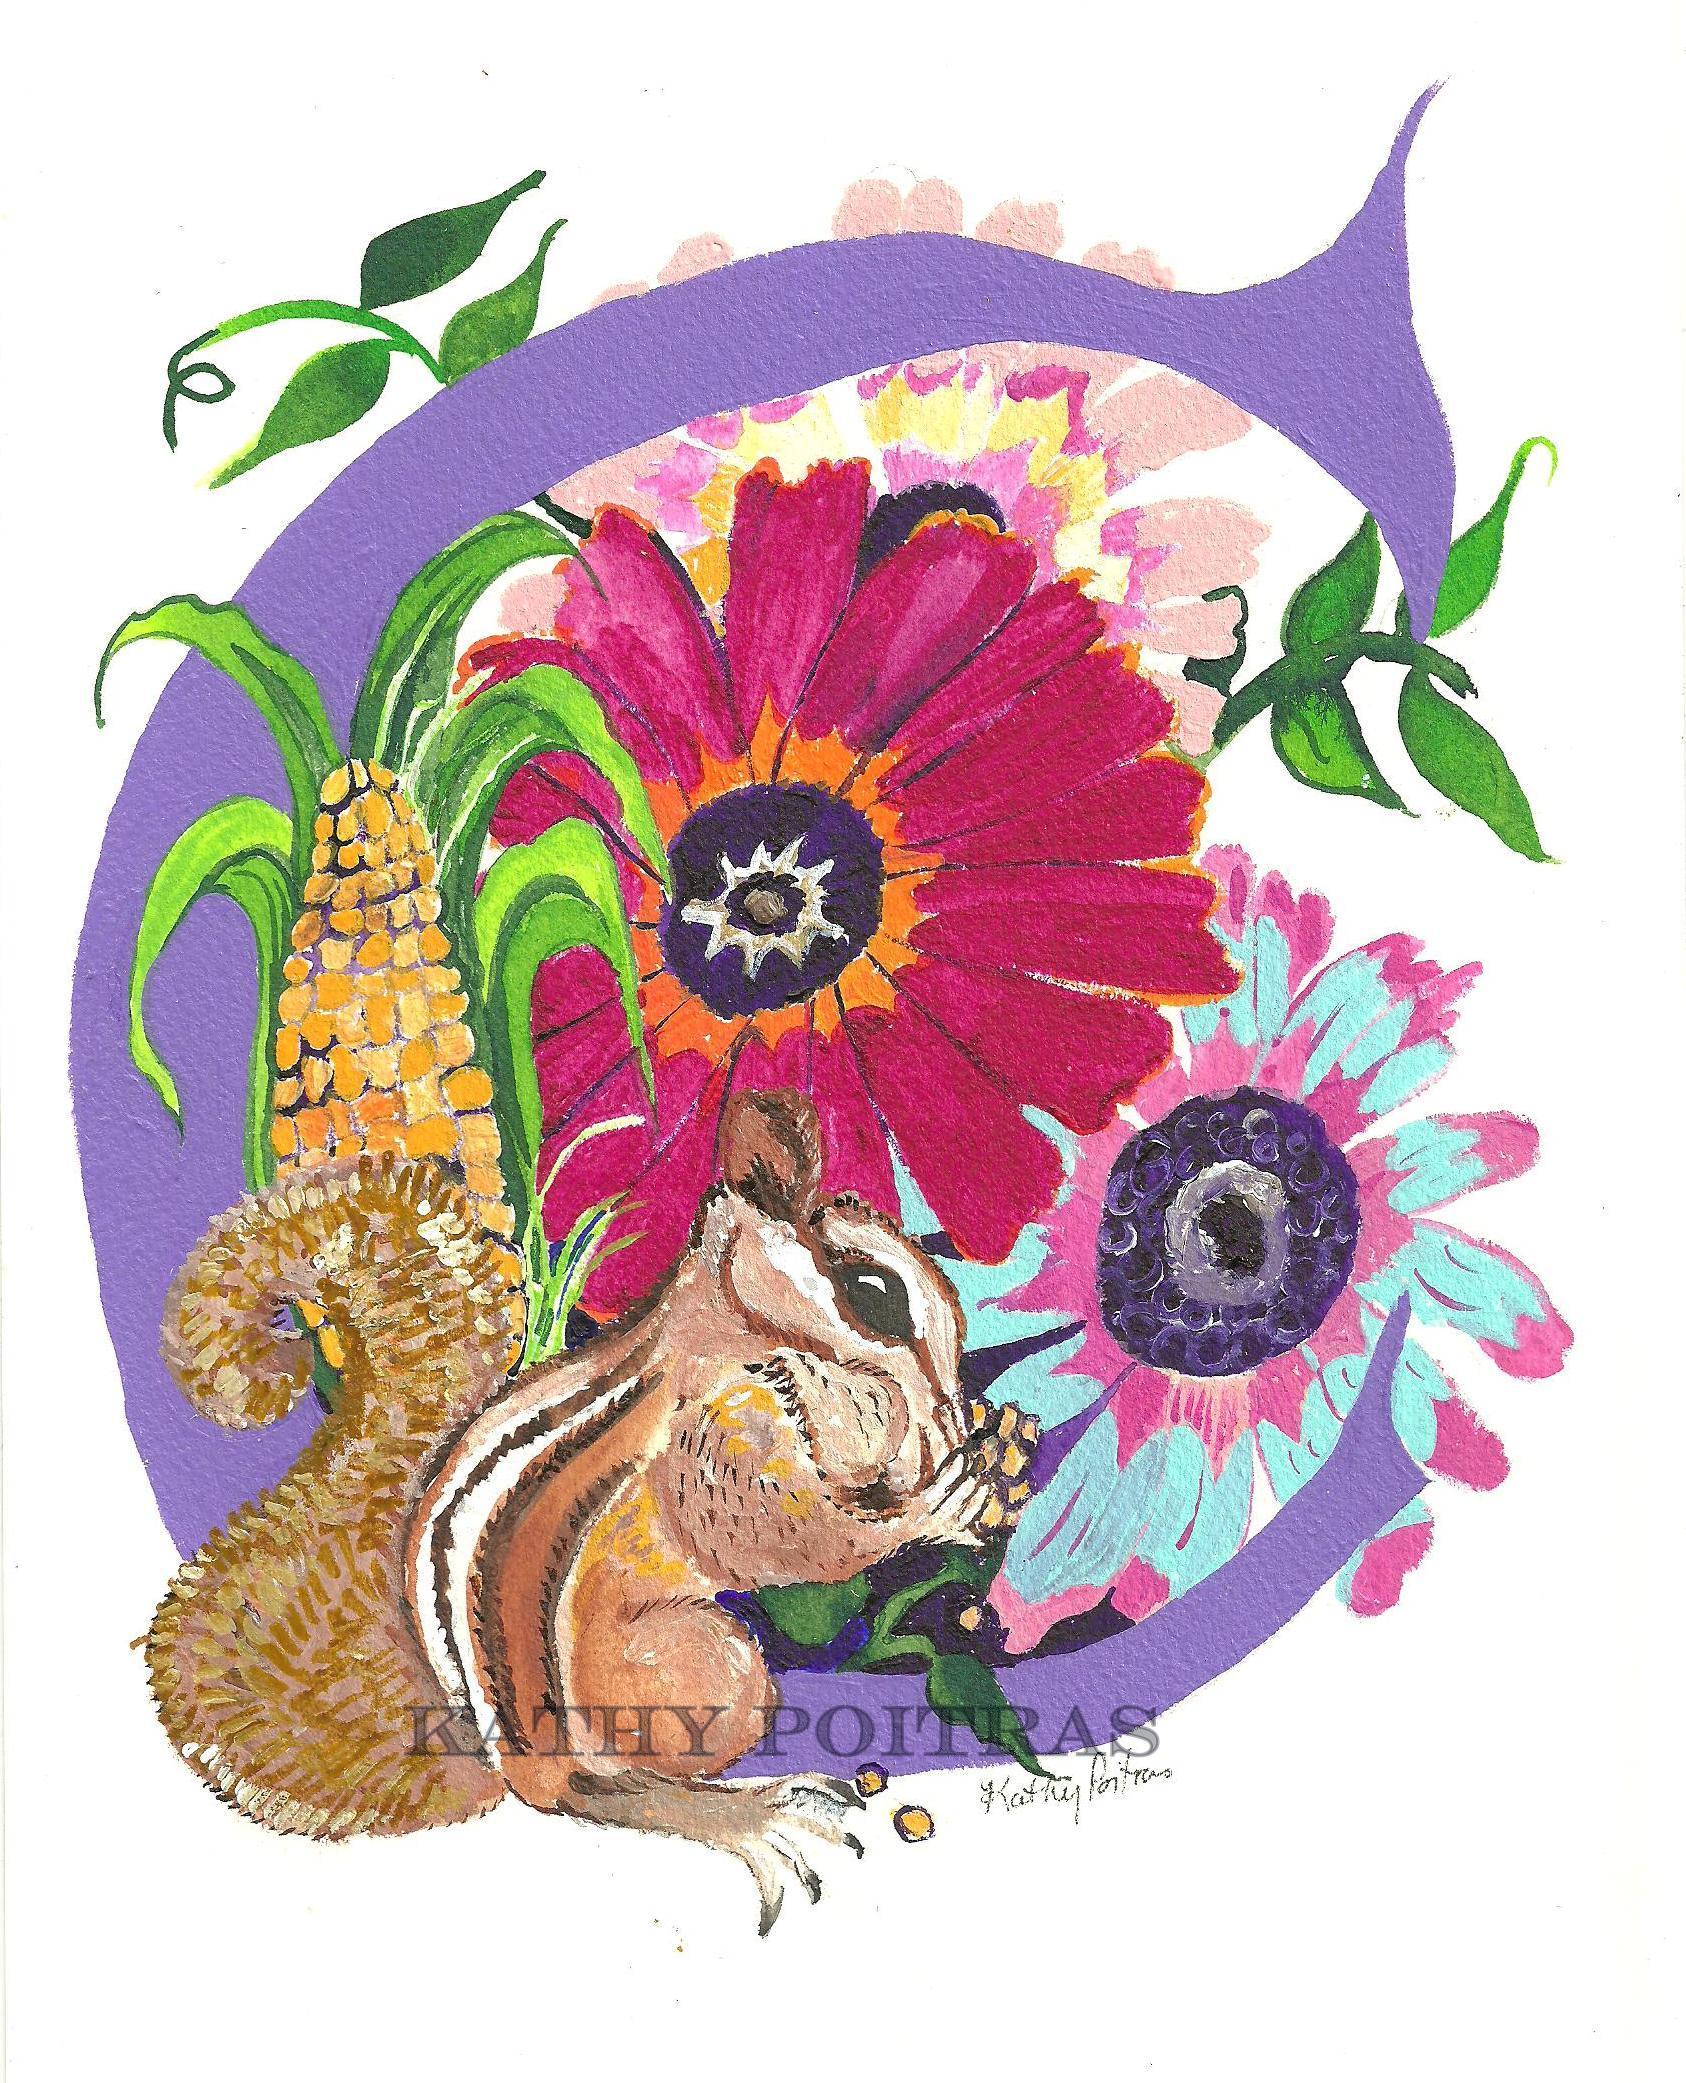 Illustrated letter C, for Chipmunk and Chrysanthemum and Corn. Art fr the nursery of children's bedroom.   by artist Kathy Poitras